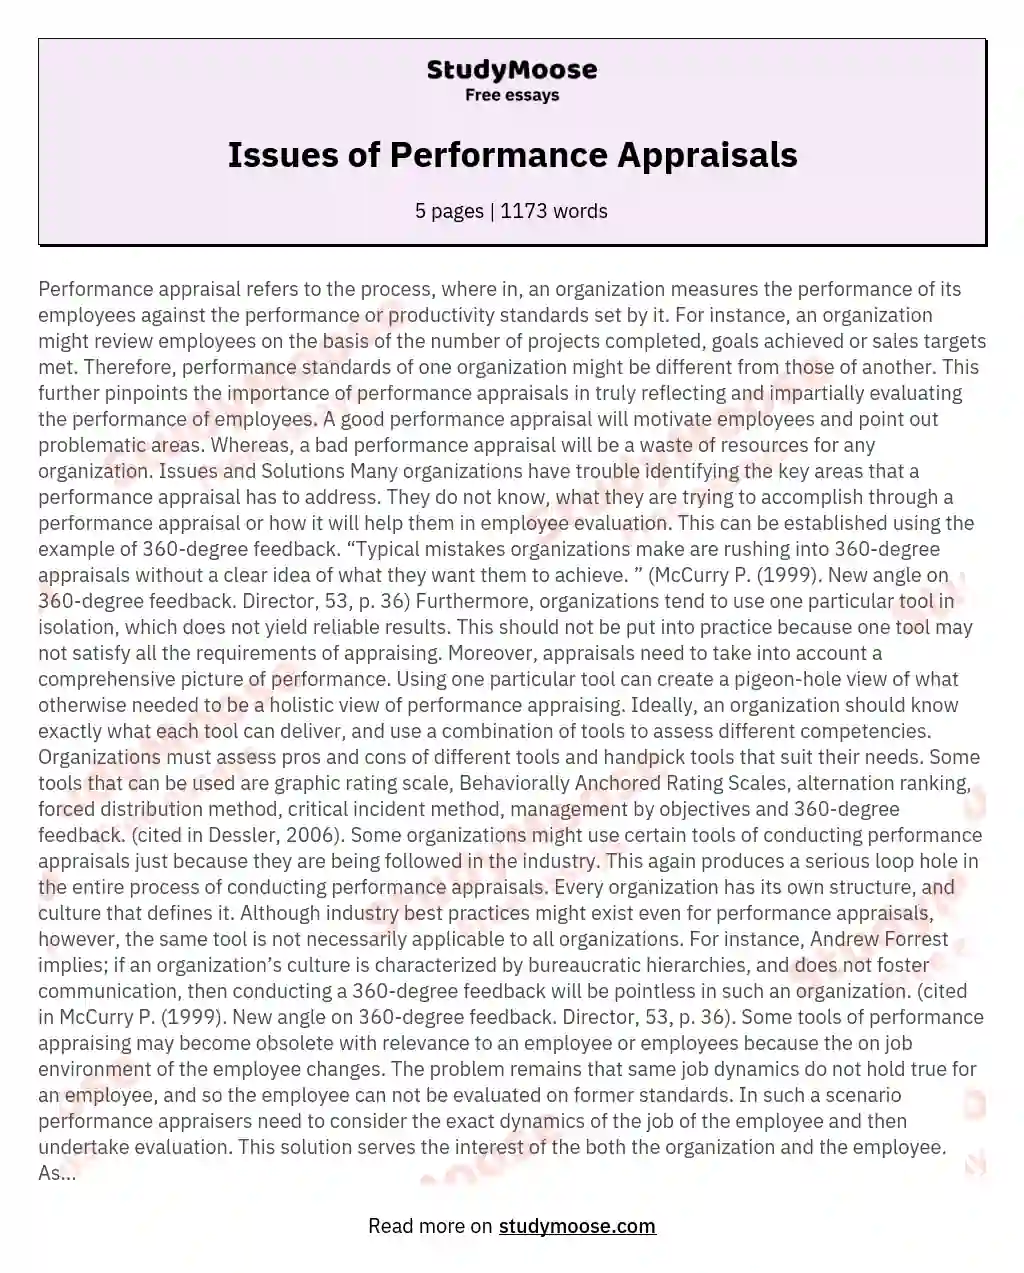 Issues of Performance Appraisals essay